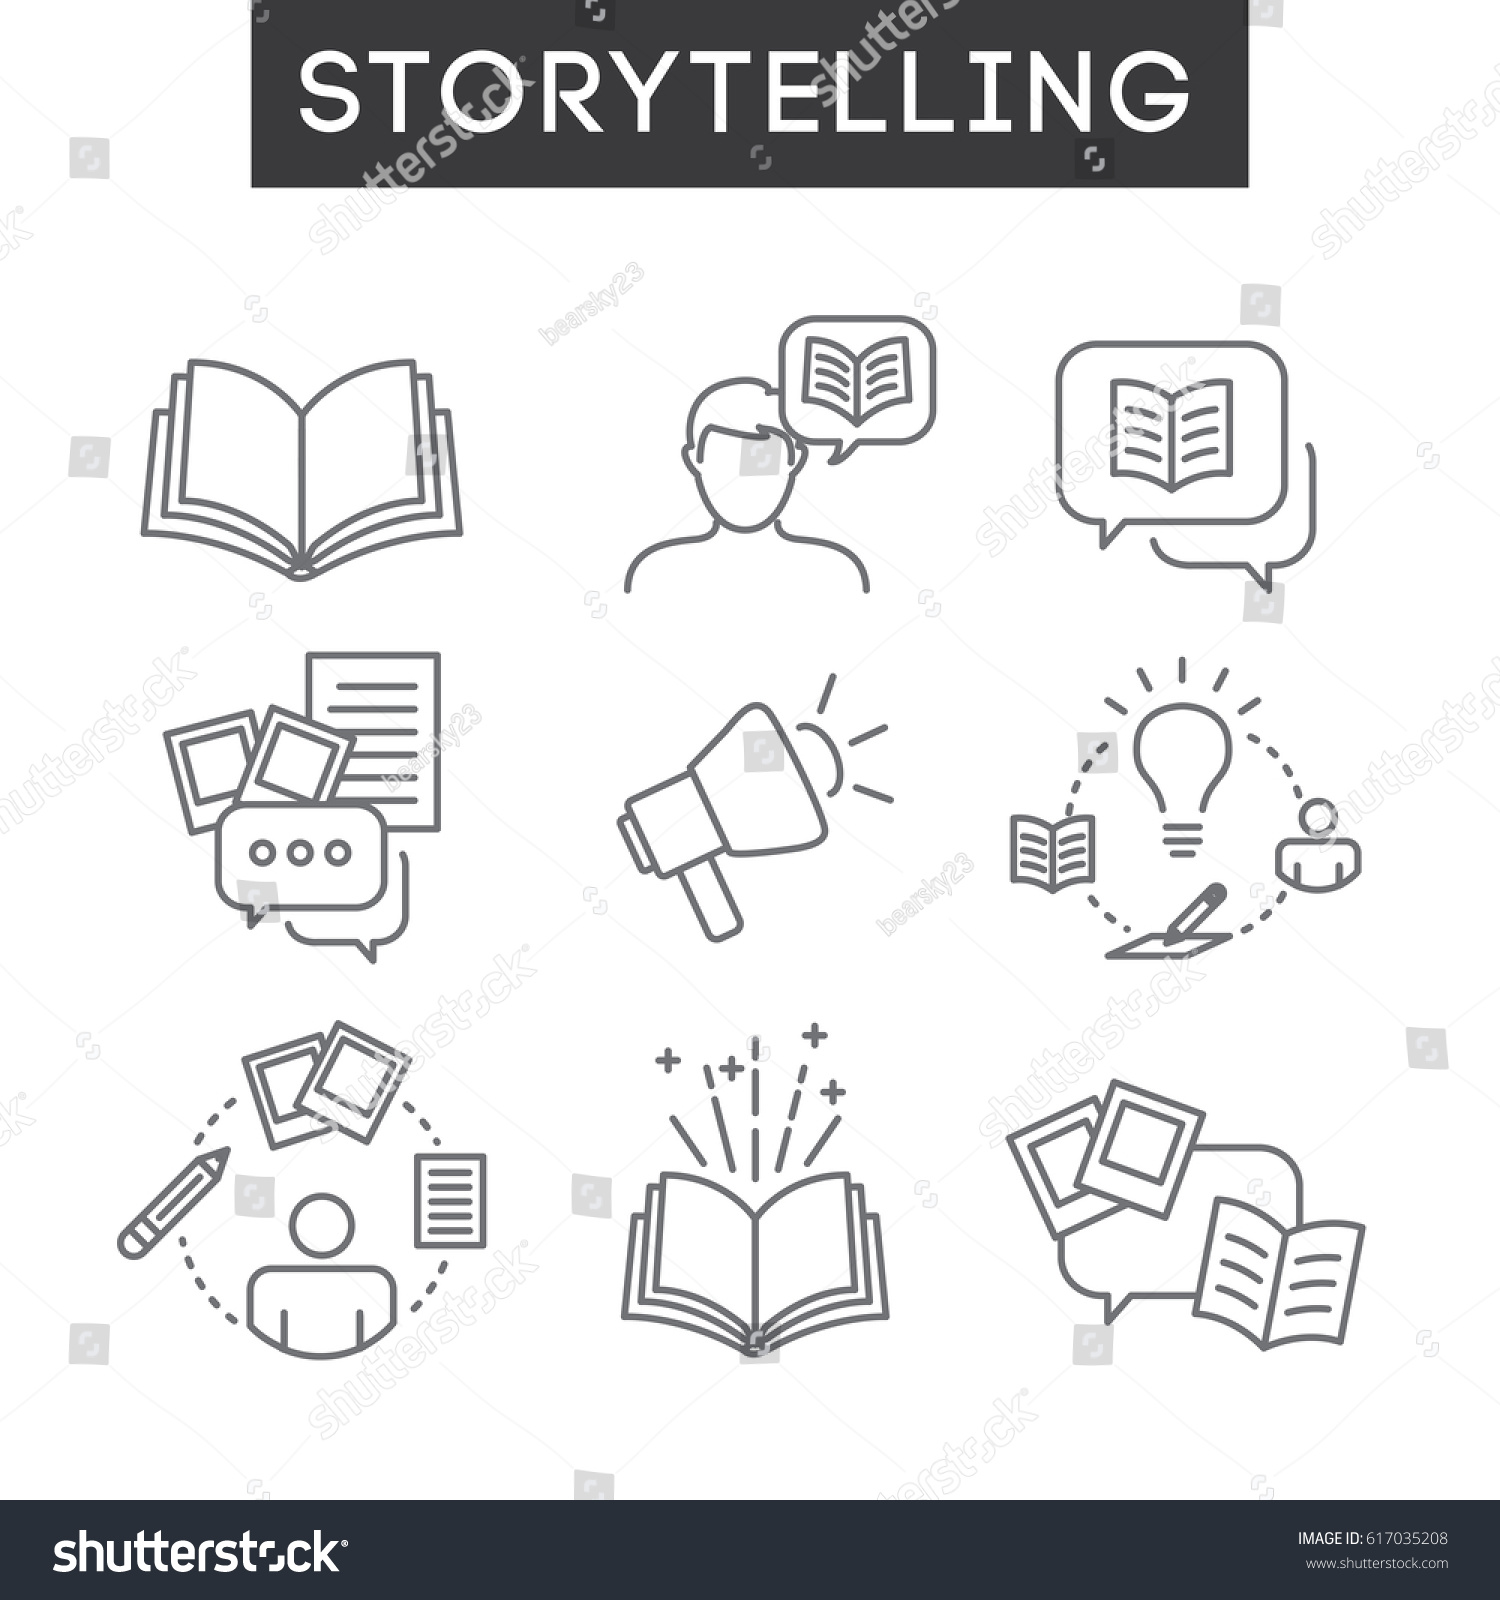 Storytelling Icon Set with Speech Bubbles and Books #617035208